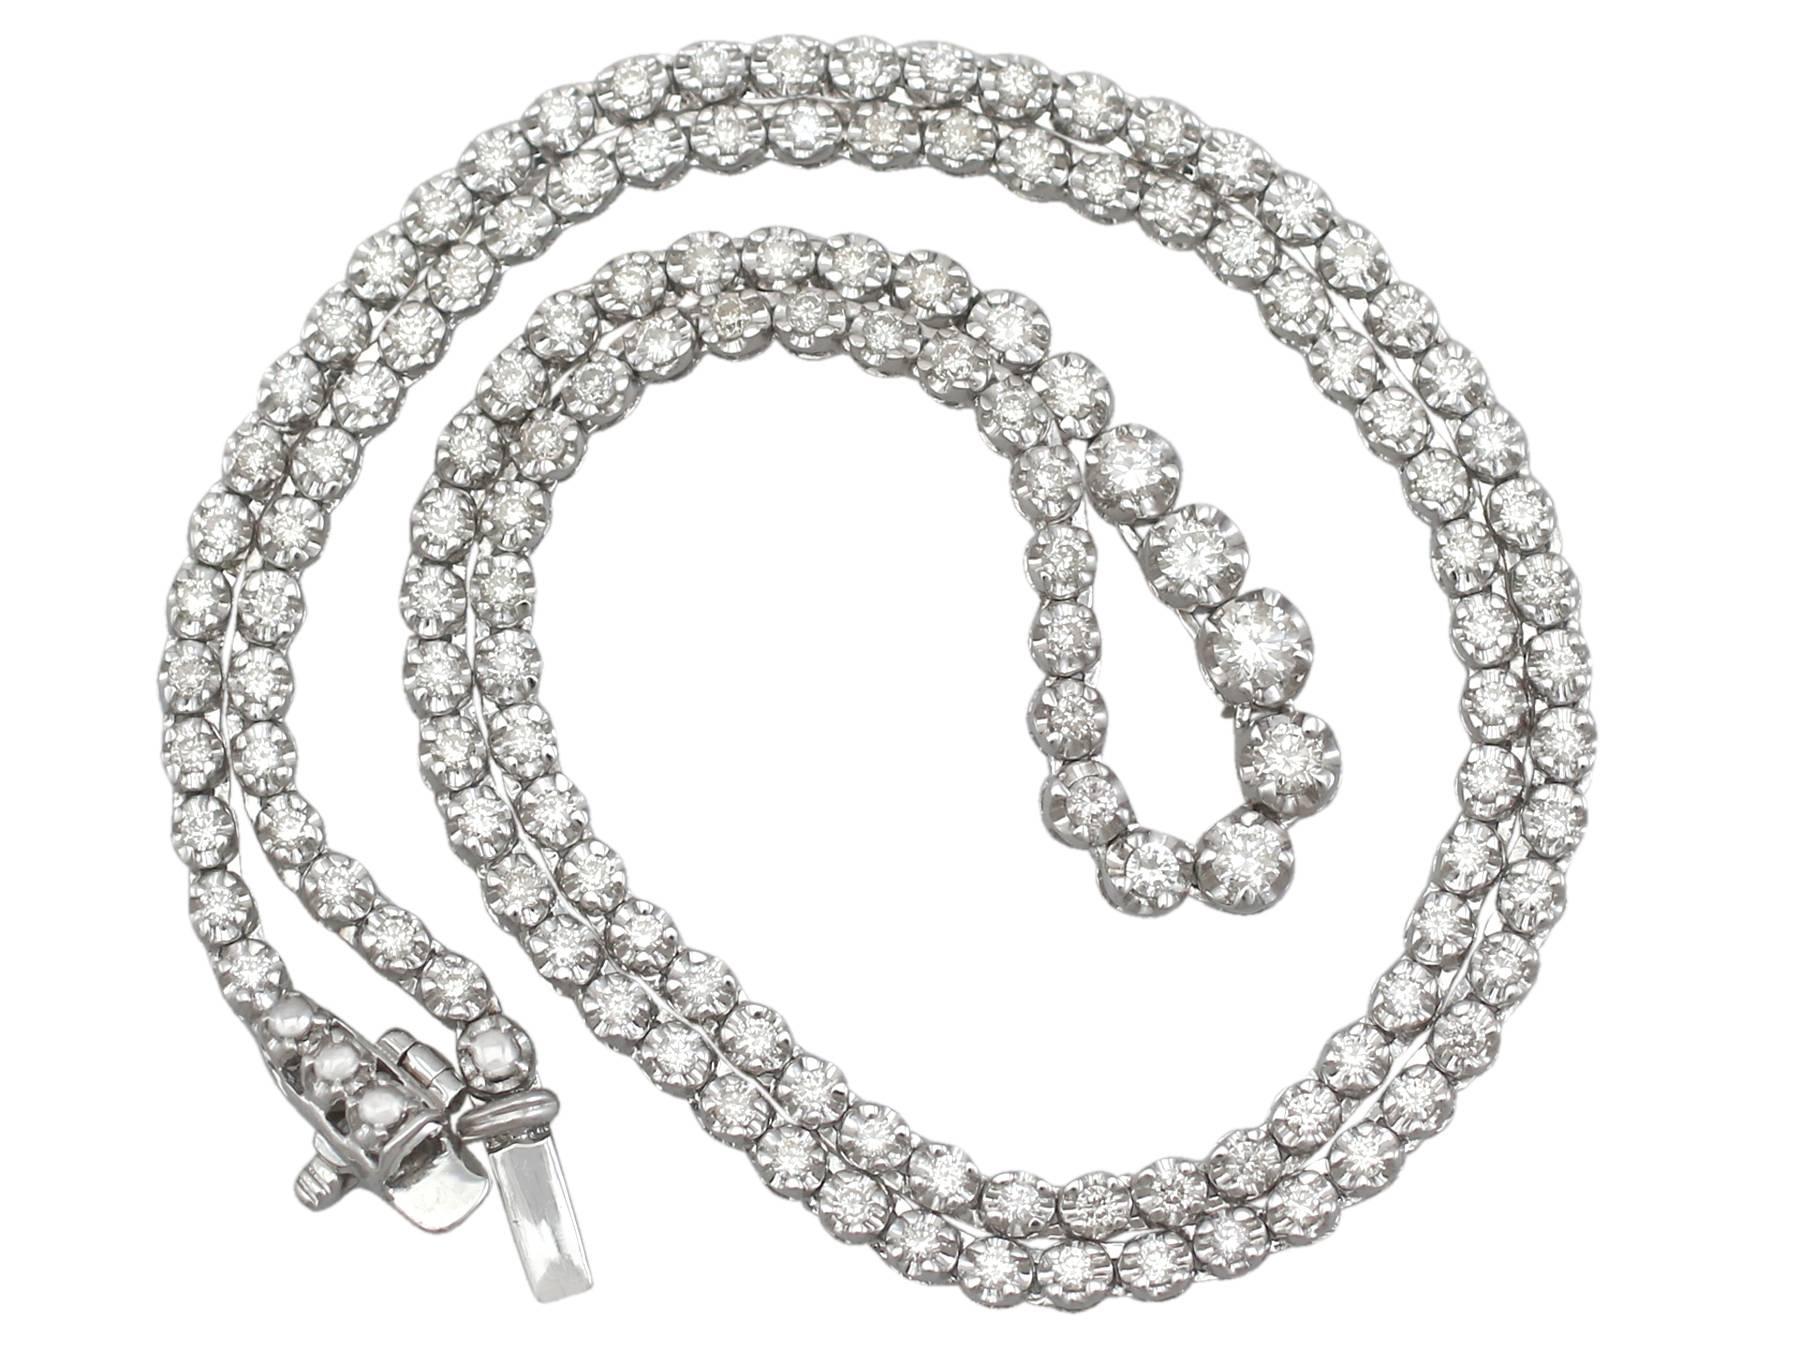 An impressive contemporary 2.60 carat diamond and 18 karat white gold line necklace; part of our diverse antique jewelry and estate jewelry collections

This fine and impressive diamond line necklace has been crafted in 18k white gold.

The necklace